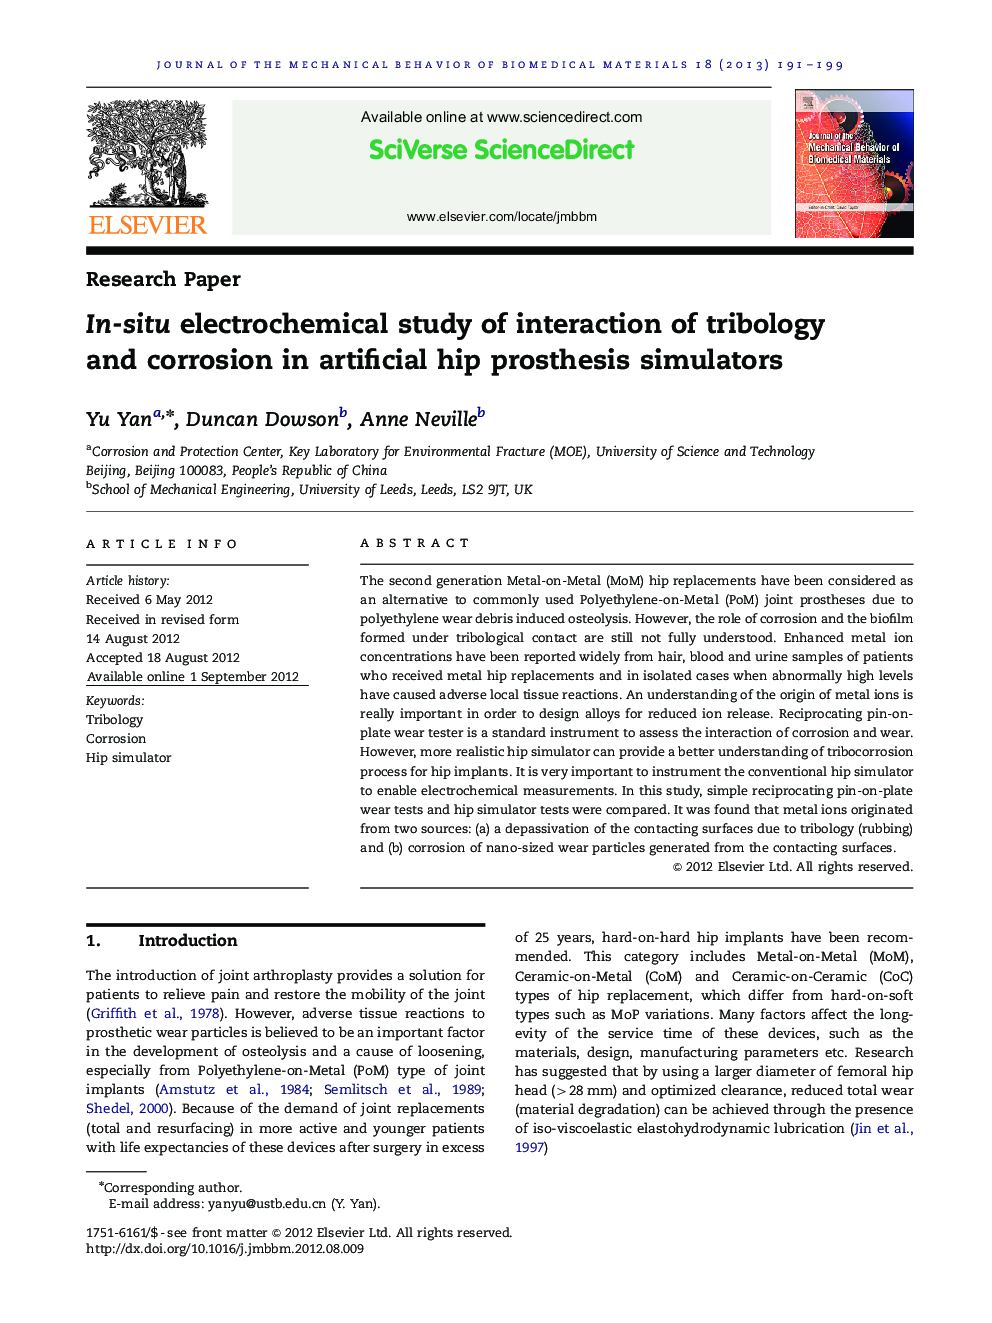 In-situ electrochemical study of interaction of tribology and corrosion in artificial hip prosthesis simulators